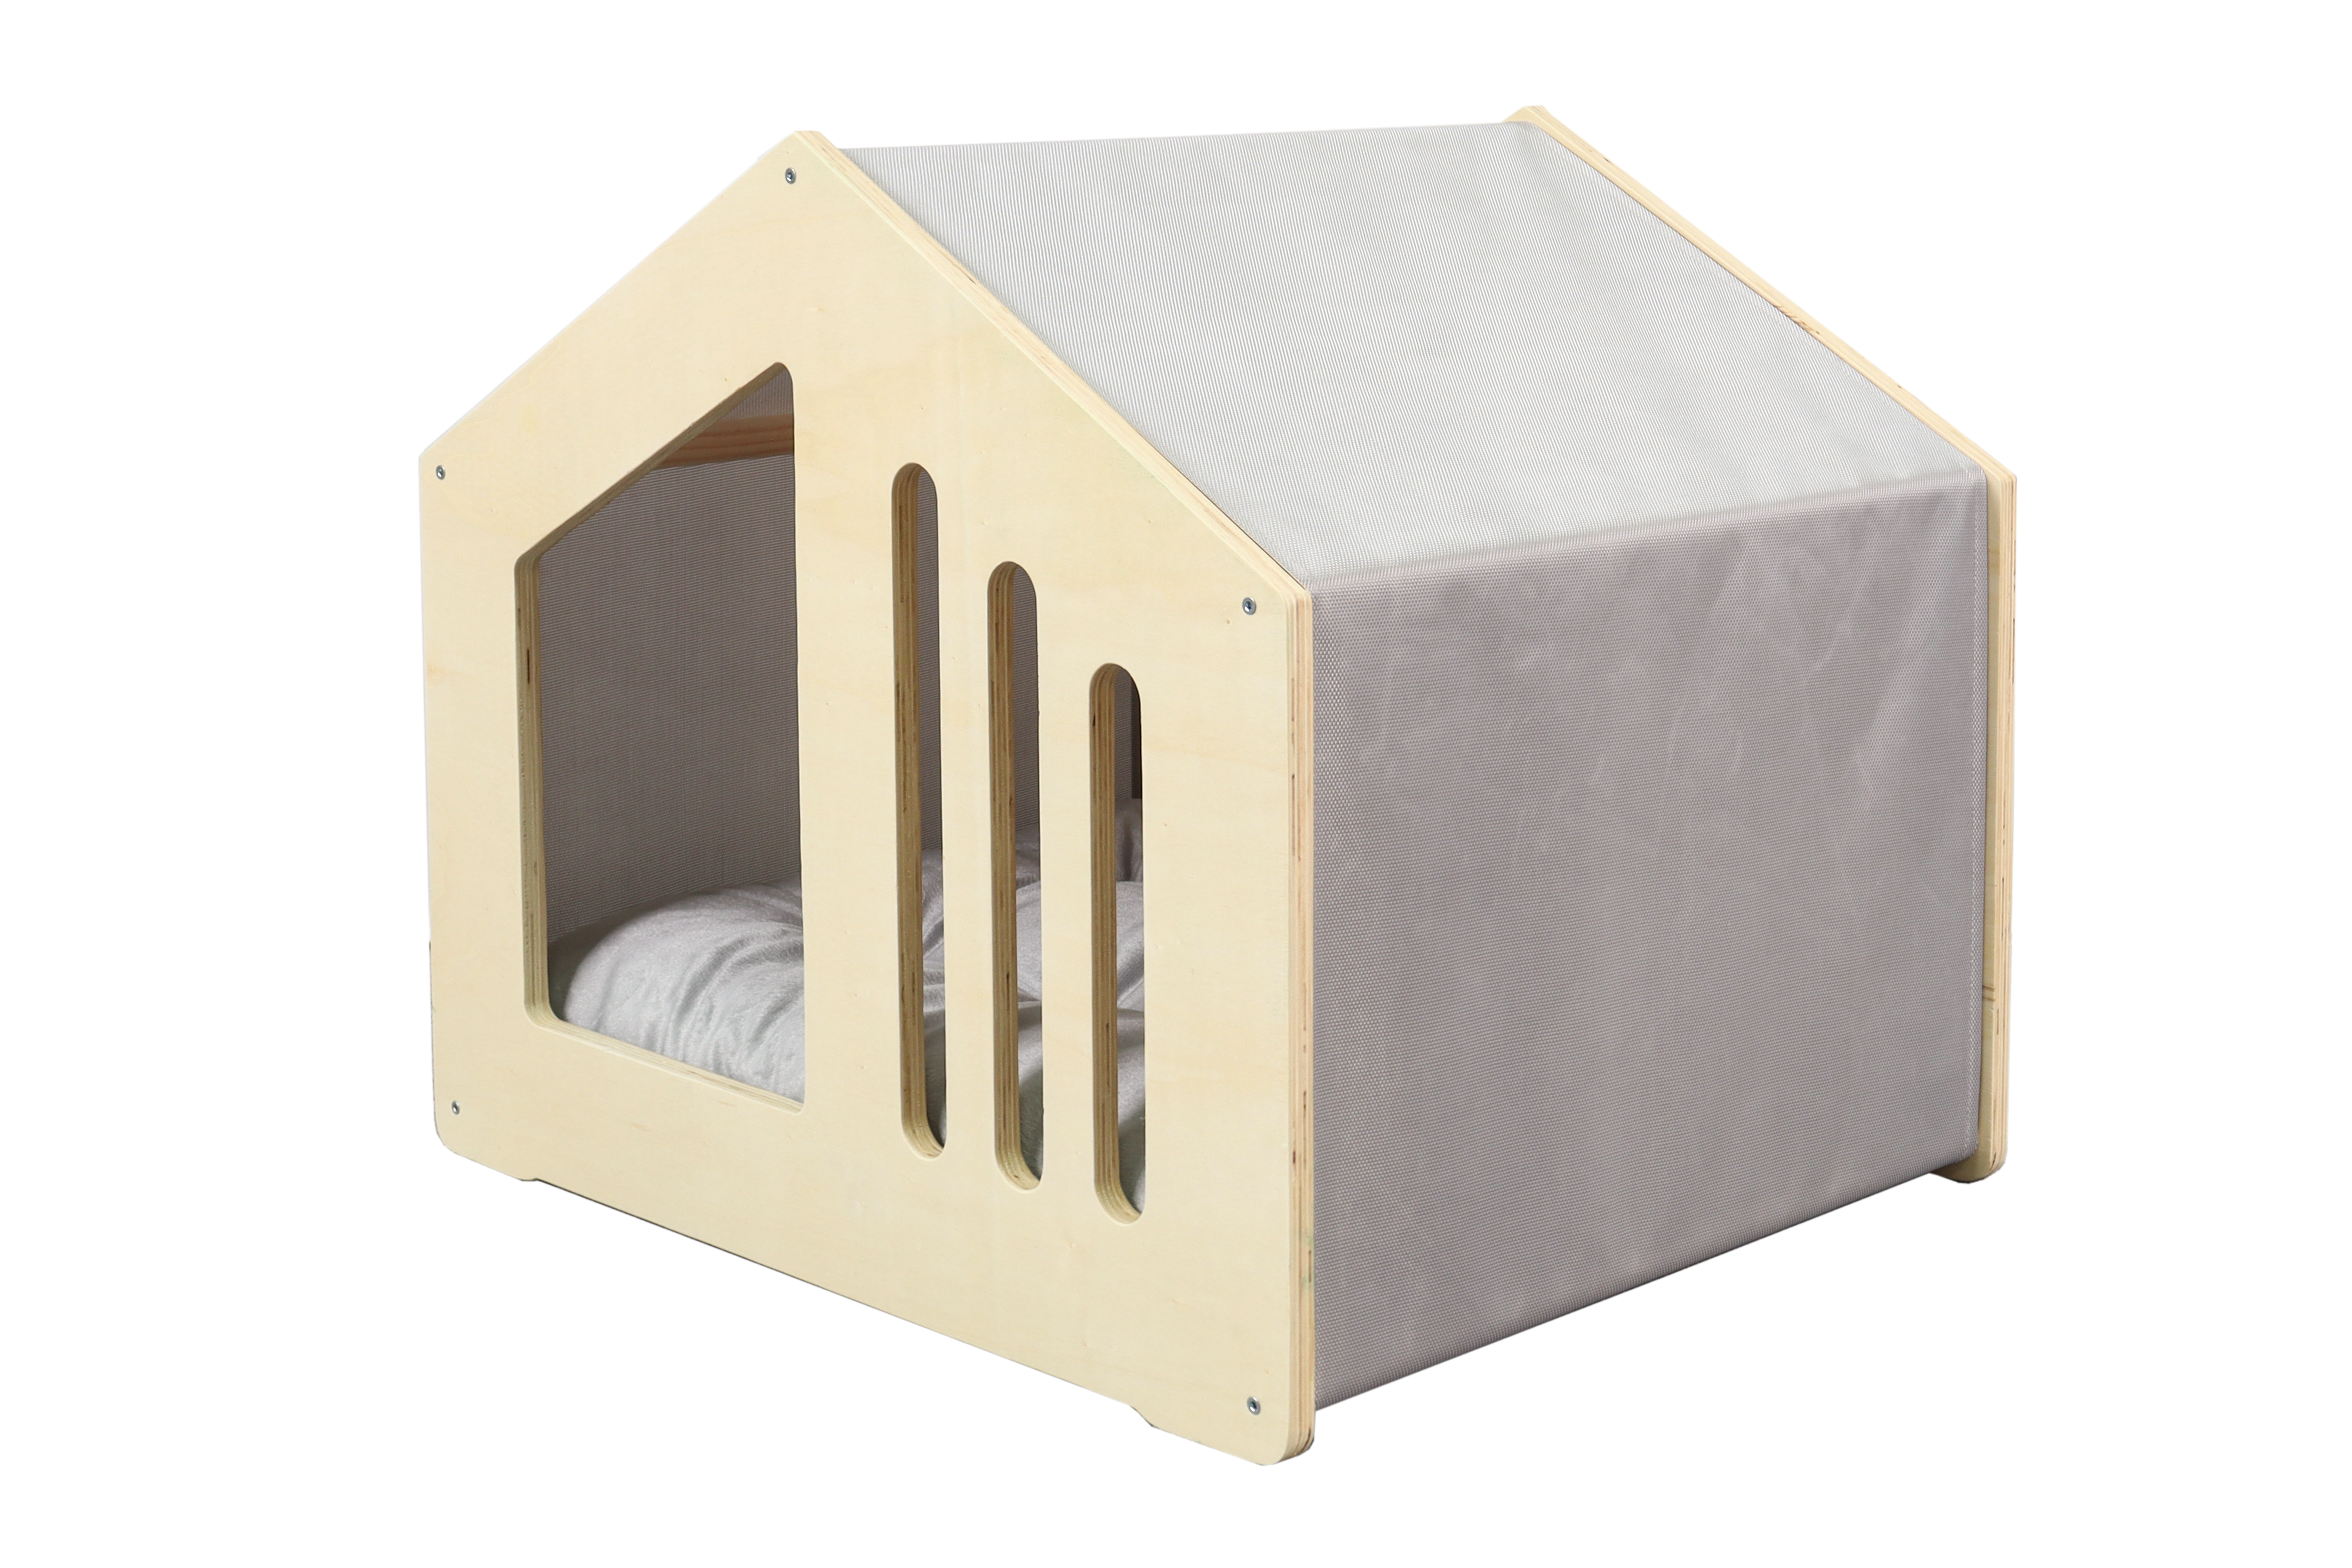 CB-PBM121147 Warm Cat Room, Cat Shelter With Removable Soft Mat, Easy To Assemble